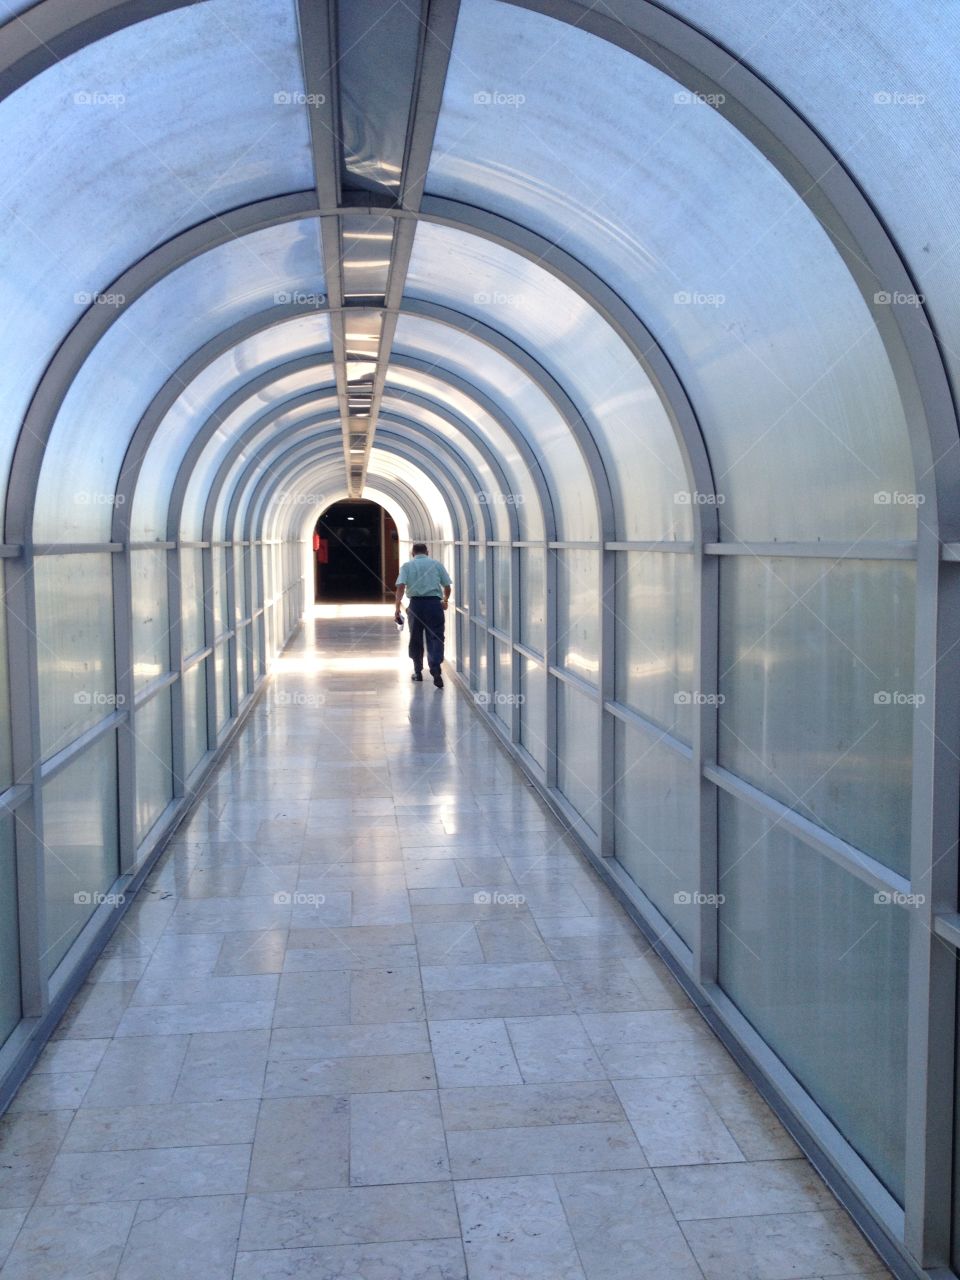 Man alone in glass tunnel: nobody to help?